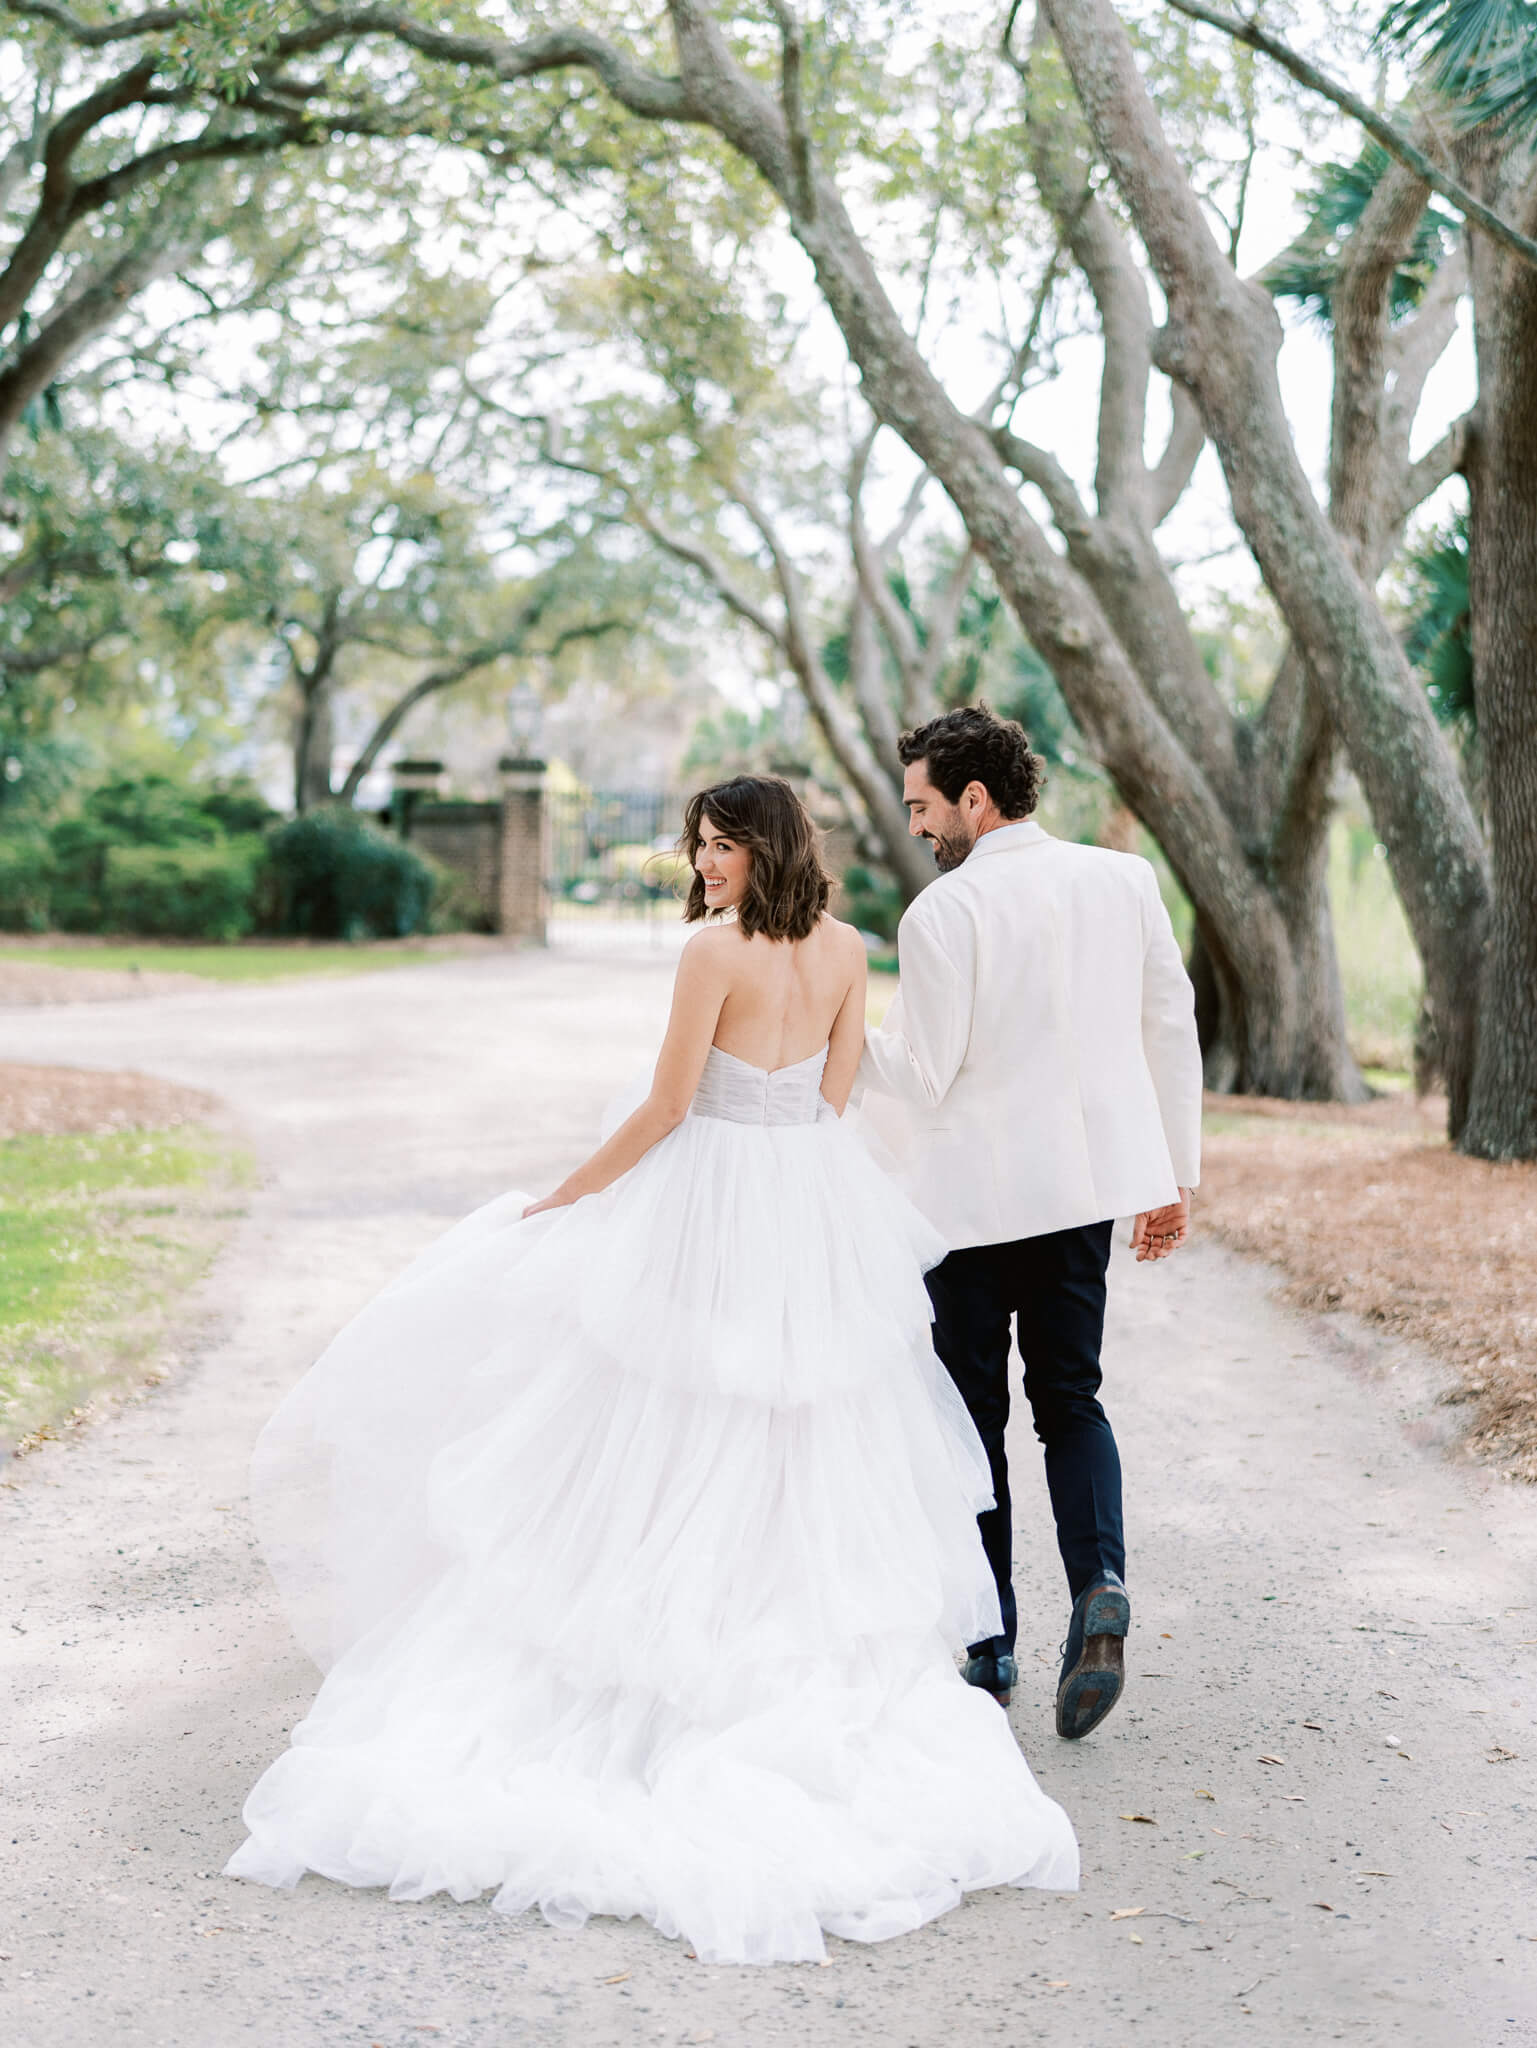 A bride and groom walking away along the sandy path surrounded by live oaks at Lowndes Grove Wedding Venue.